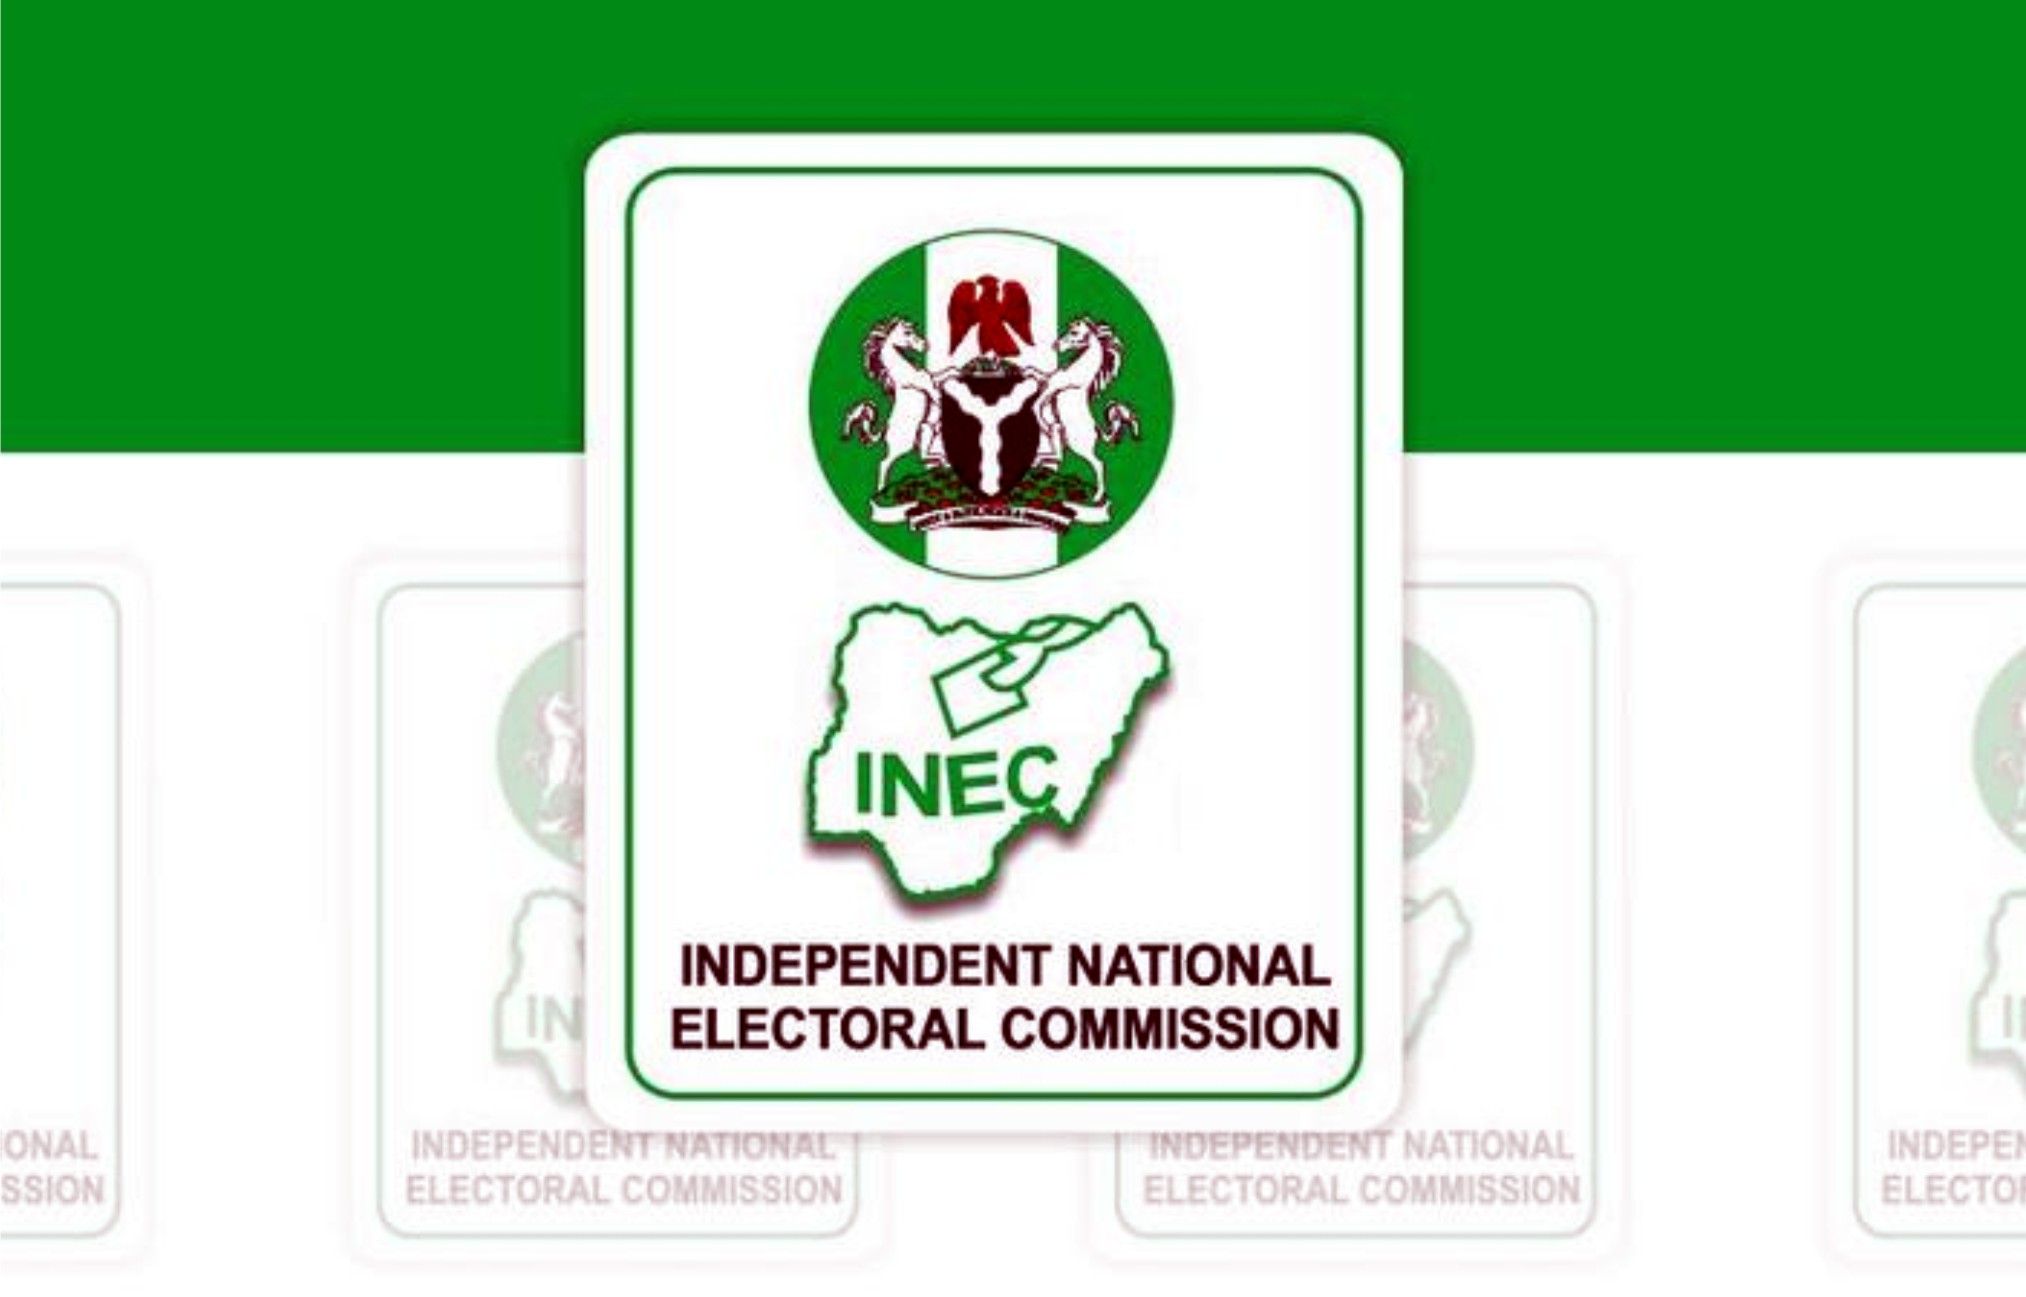 INEC Suspends Rerun Elections In 20 Polling Units In Enugu, Akwa Ibom, Kano